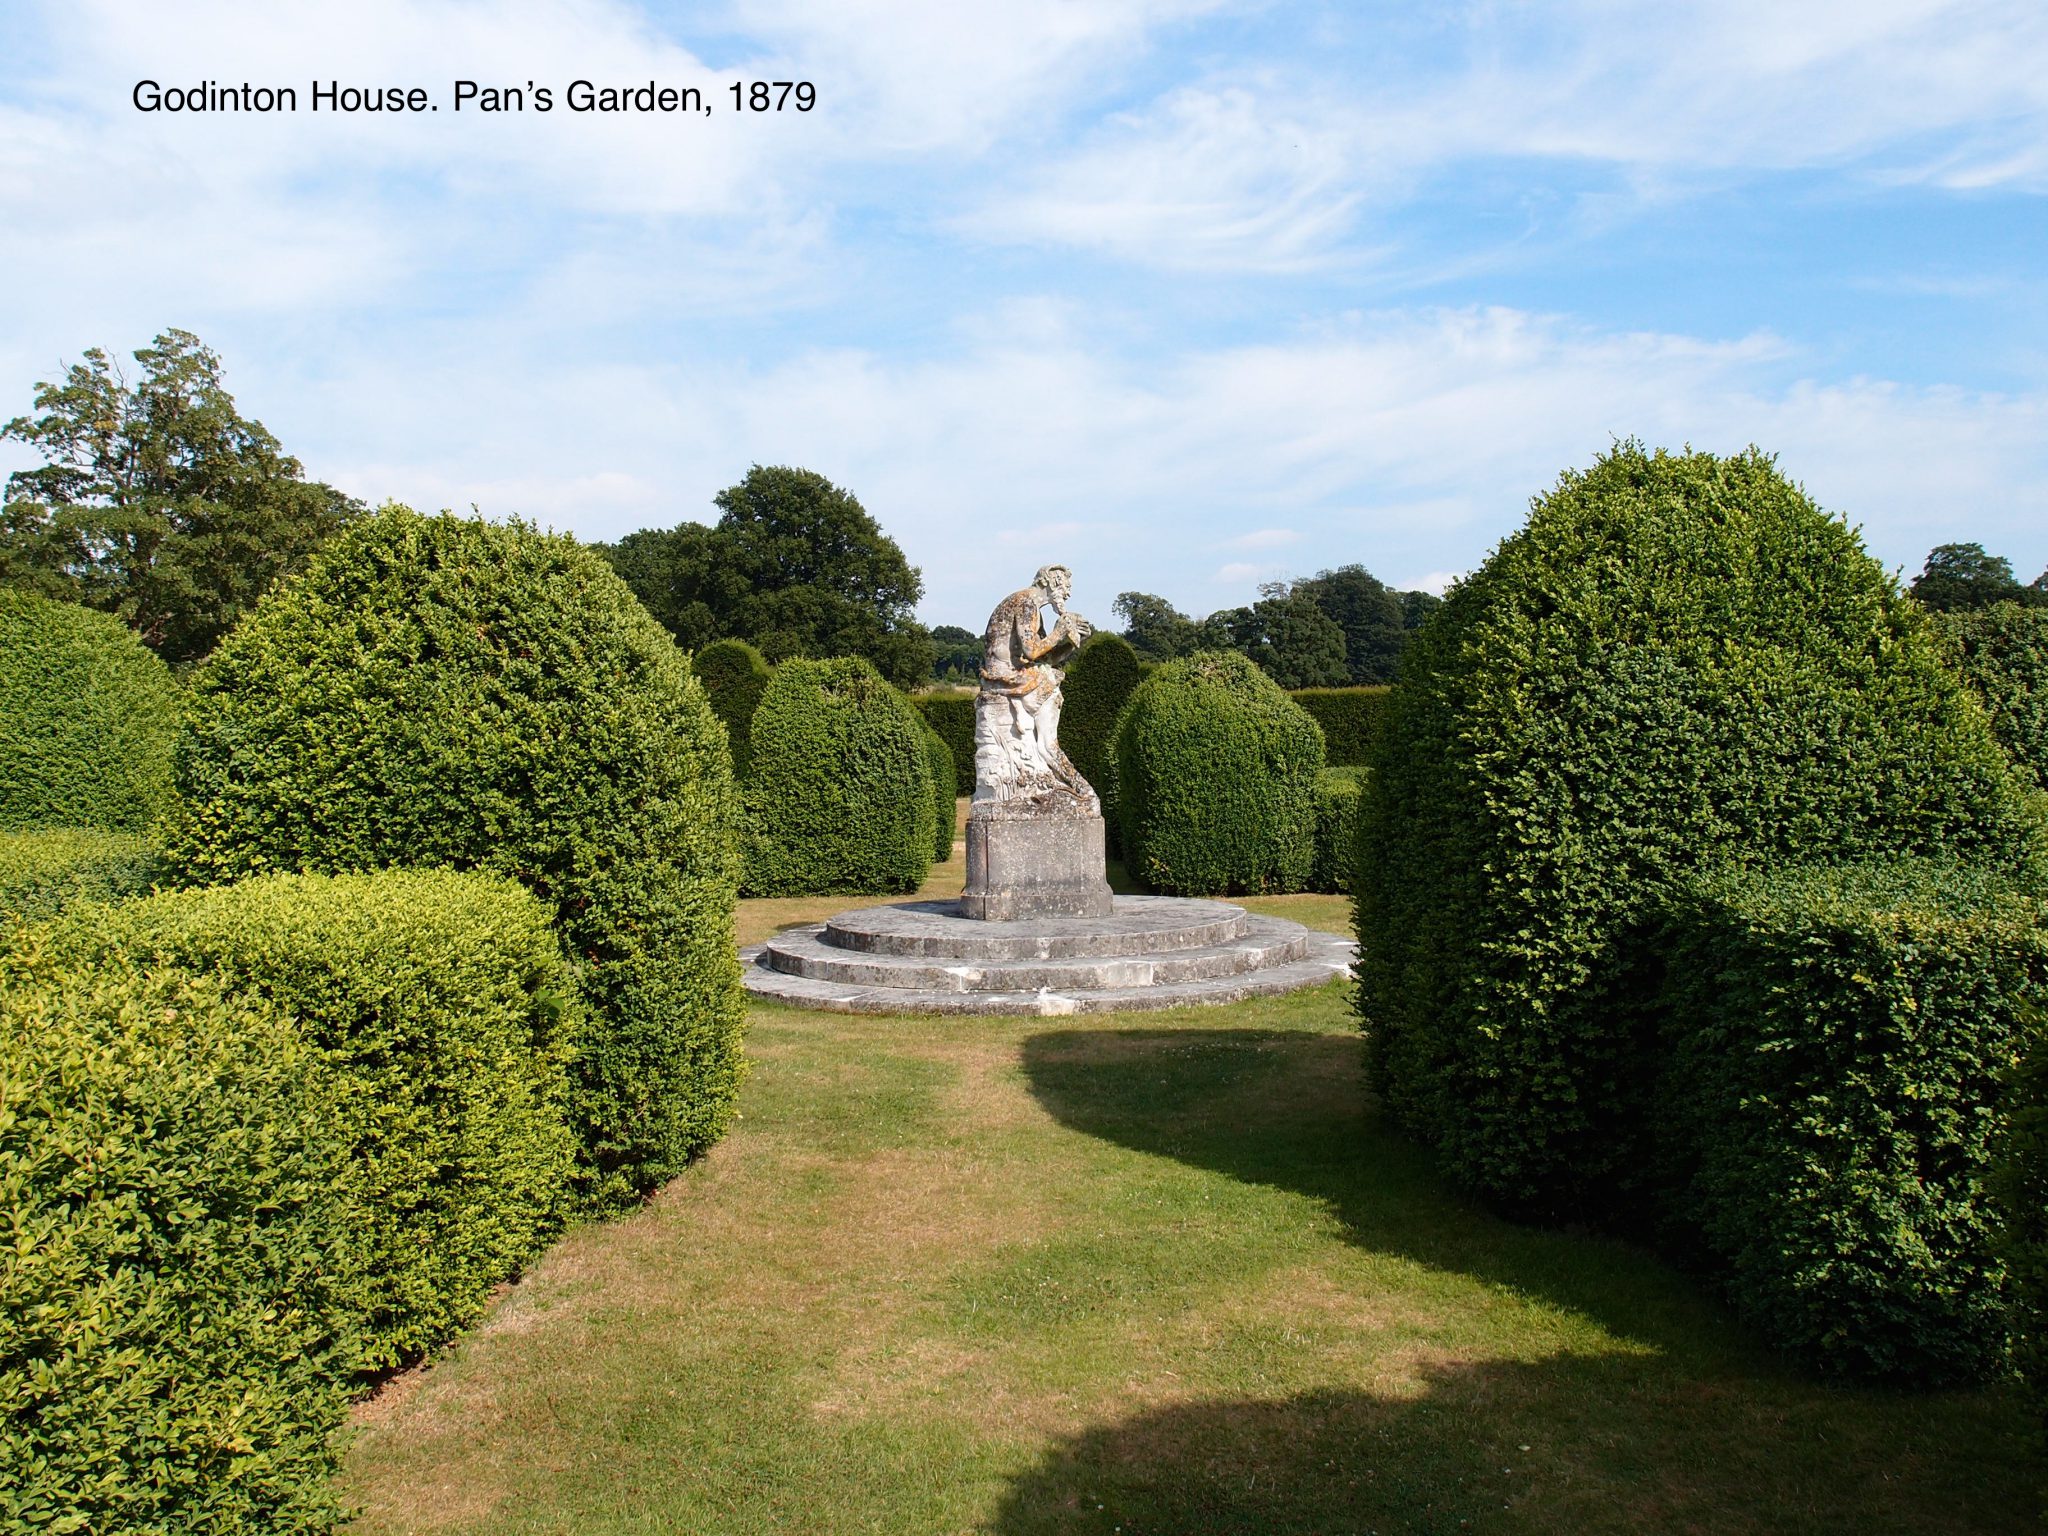 Pan's Garden, is the oldest surviving portion of the gardens.